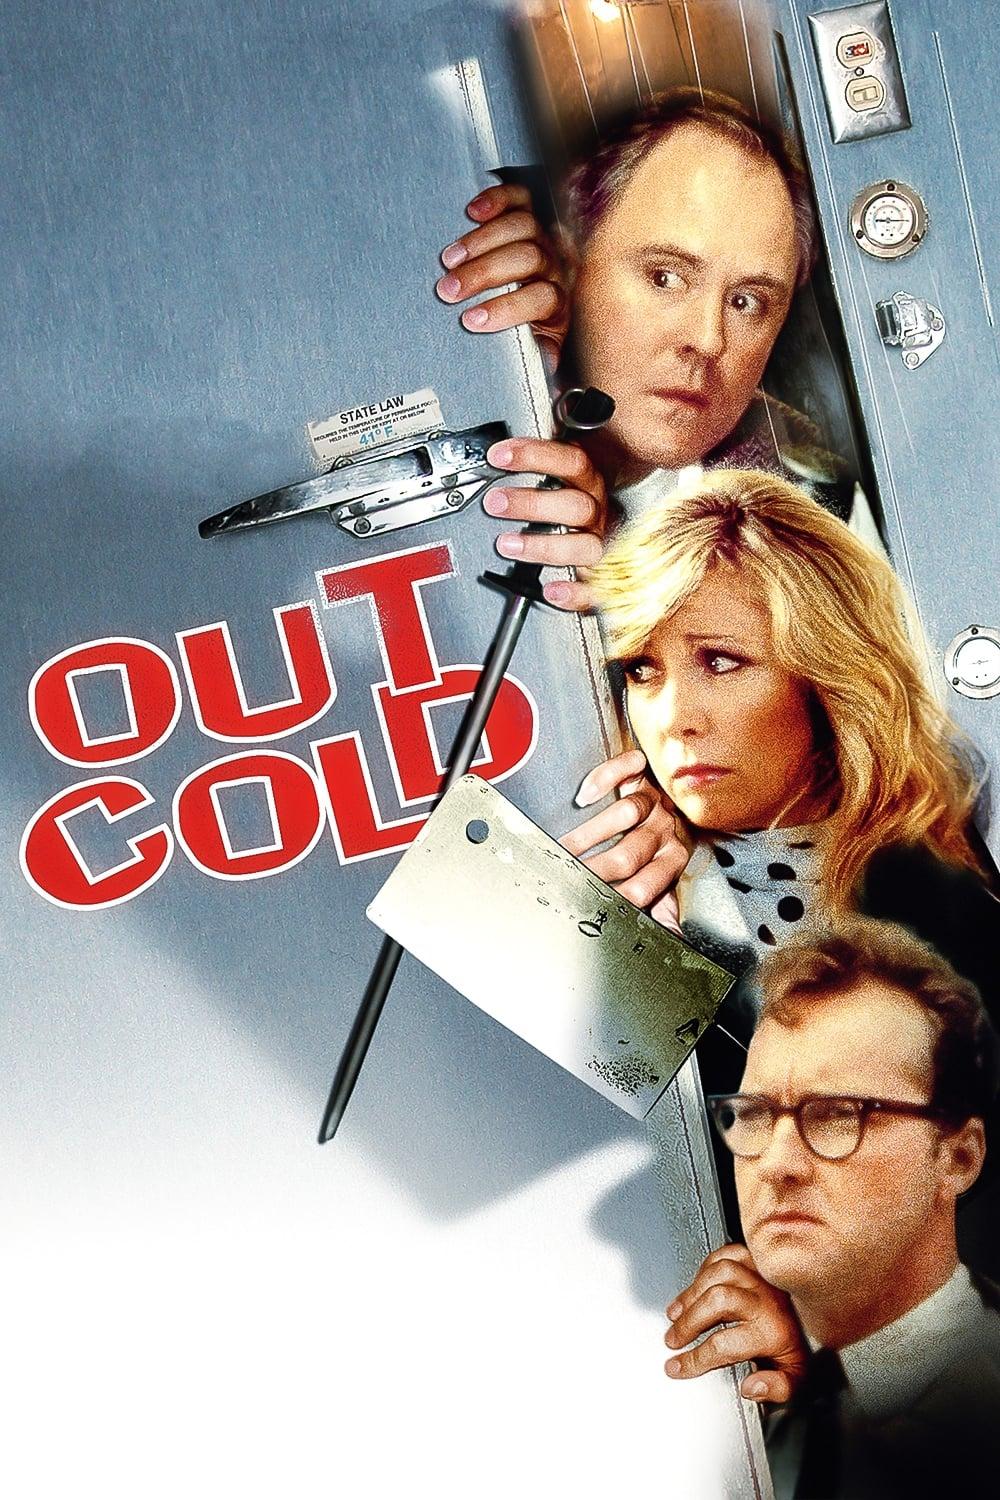 Out Cold poster